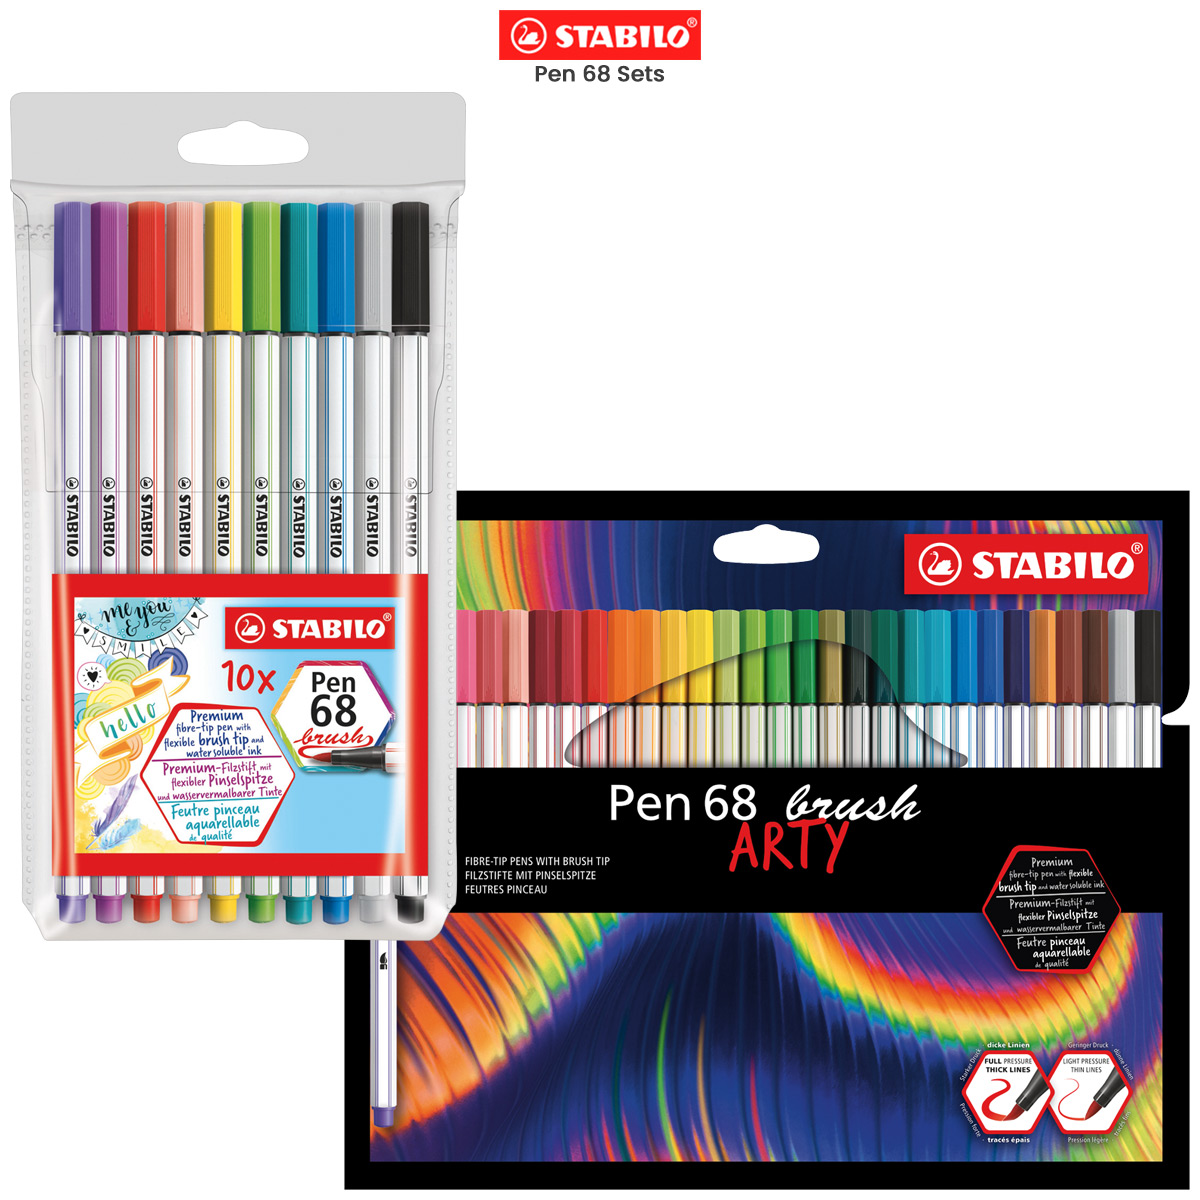 Stabilo PointMax Nylon Tip Fineliner - 0.8mm - Single Pen - 12 Colours  Available